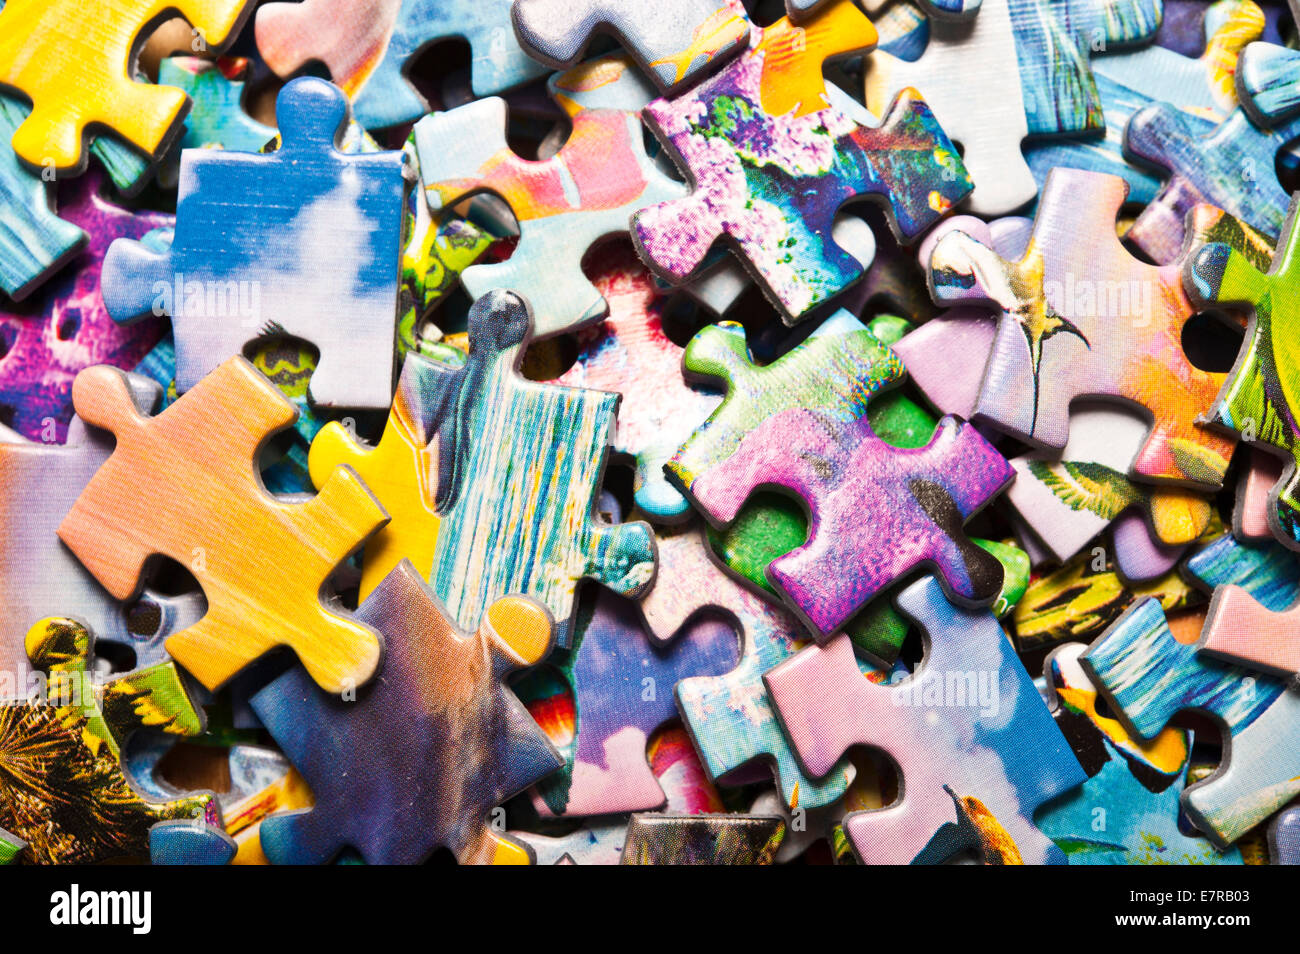 jigsaw puzzle pieces Stock Photo